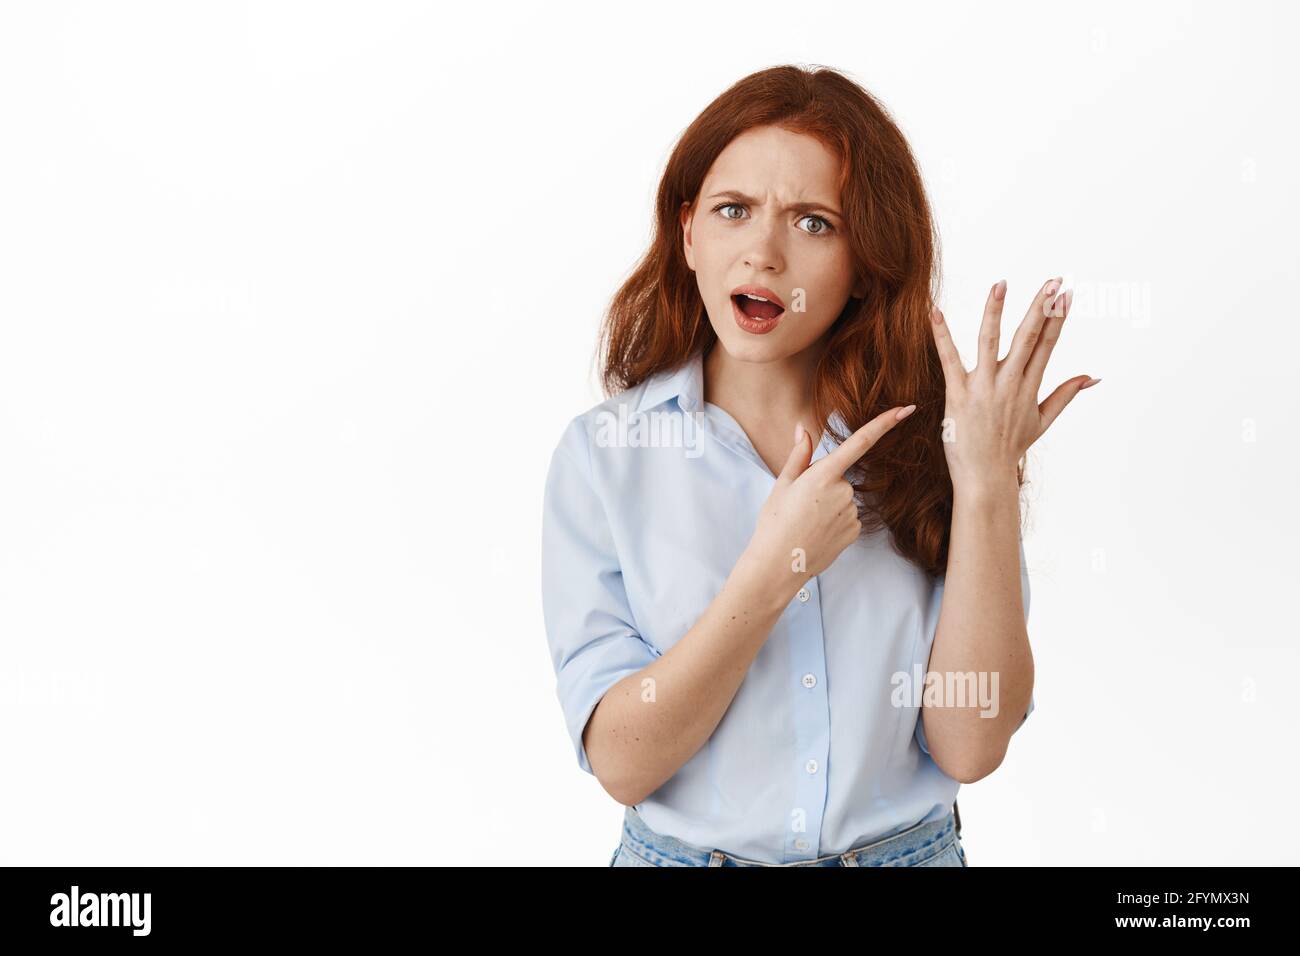 Angry girlfriend pointing at finger without ring, wants to get married, having fight with boyfriend about marriage and proposal, standing against Stock Photo